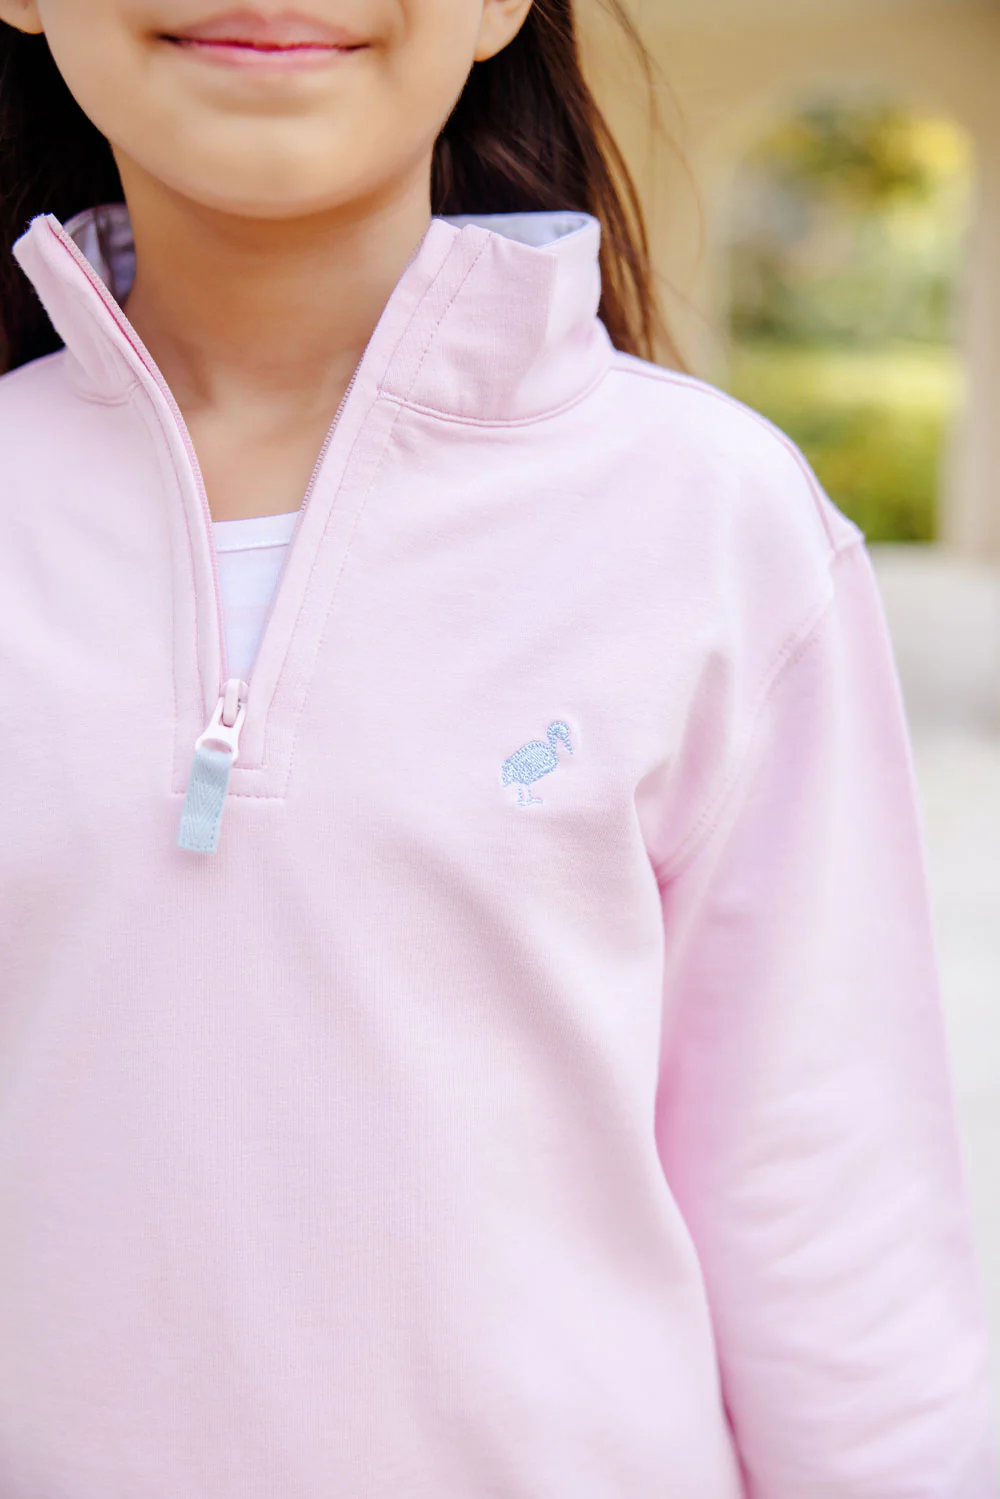 Canter Collar Half-Zip in Palm Beach Pink with Buckhead Blue